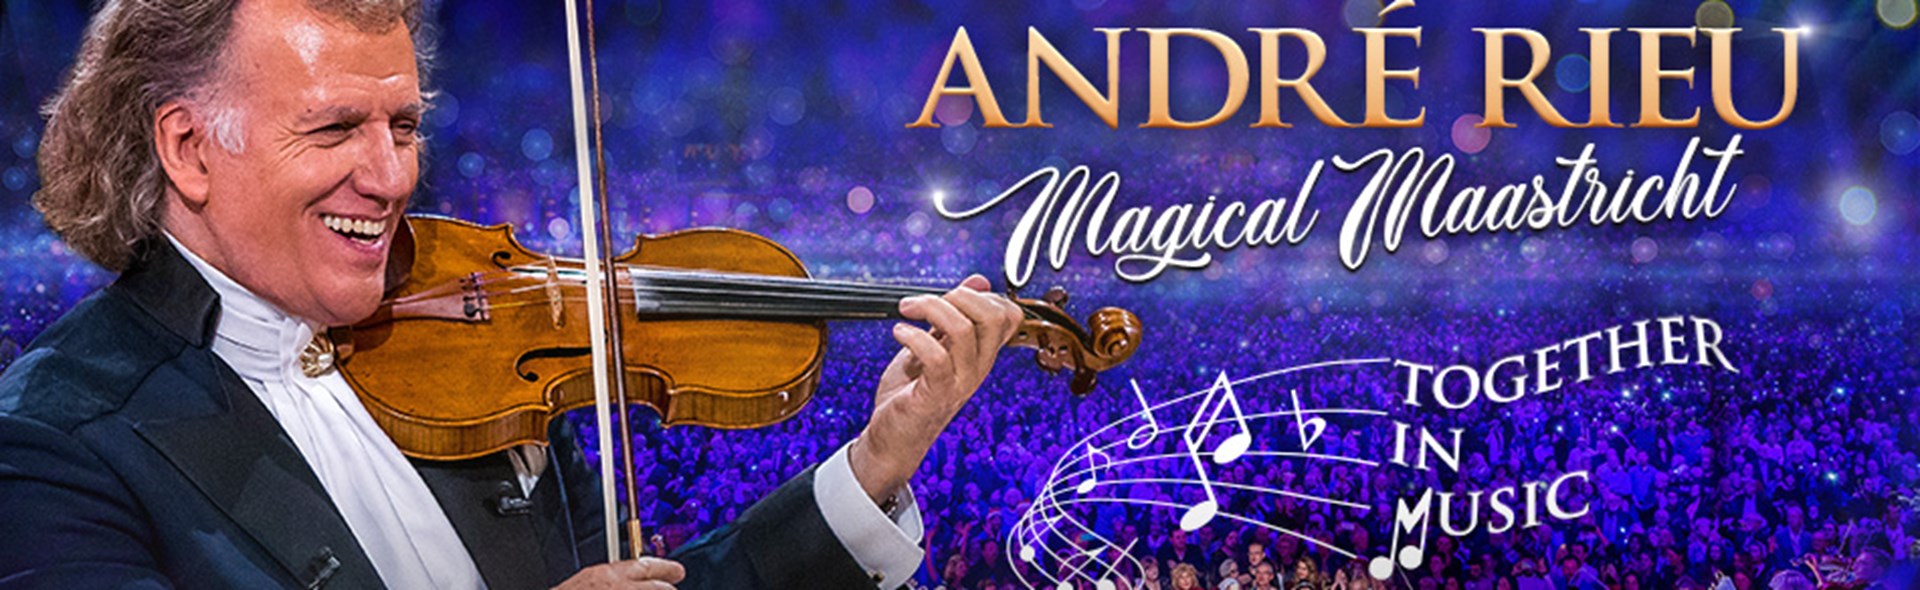 André Rieu   Magical Maastricht: Together In Music